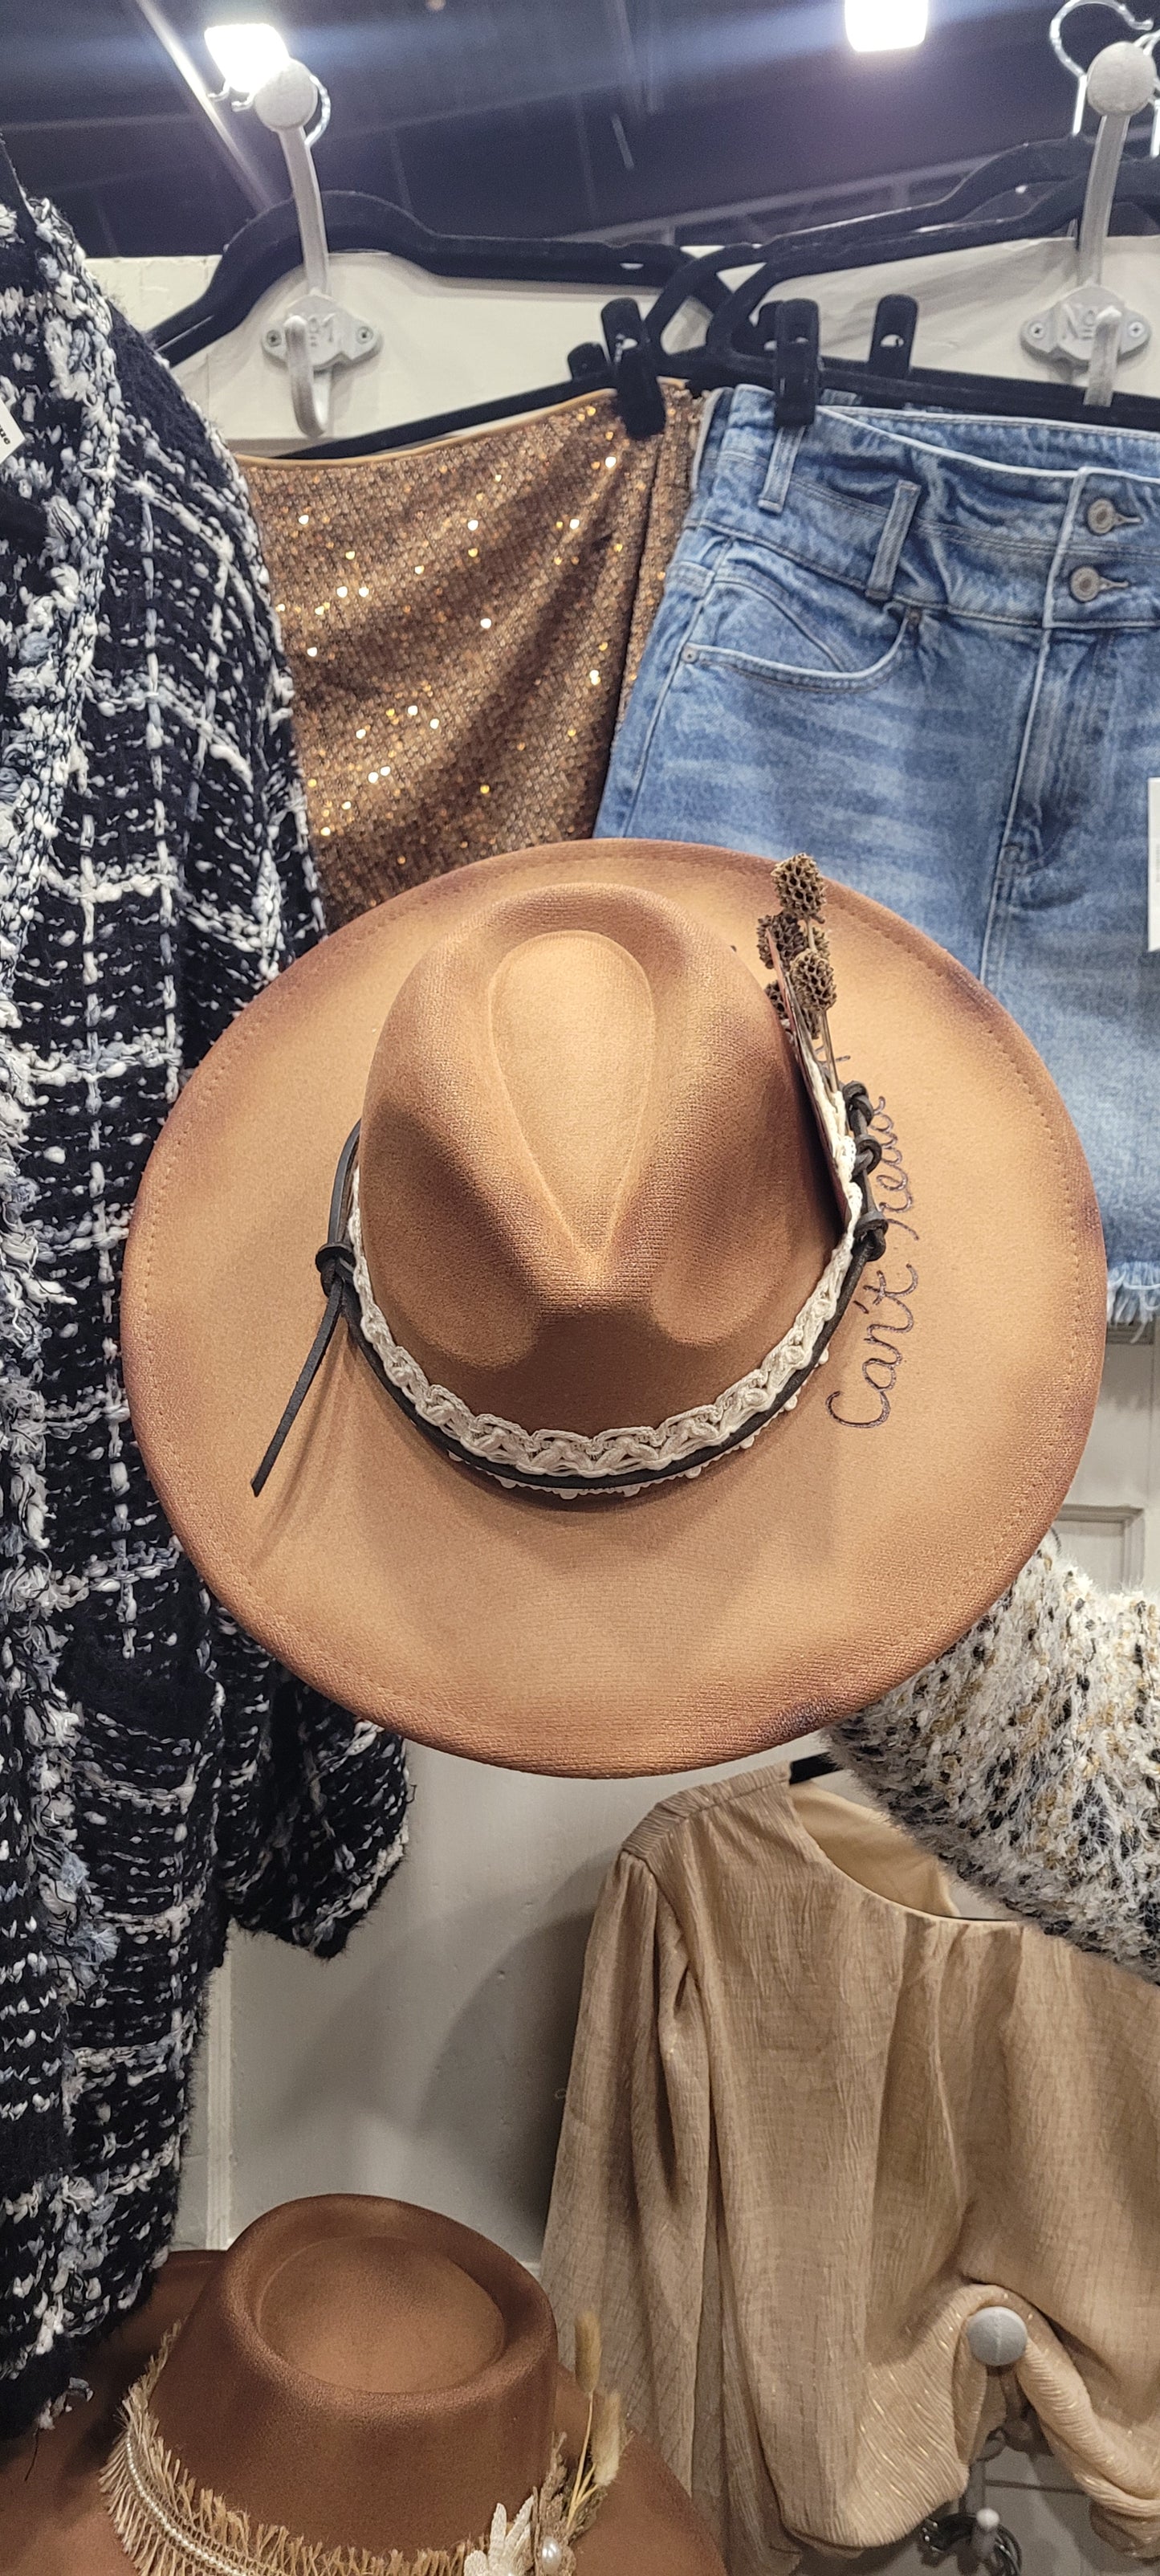 Features natural lace ribbon, leather, pine cones, playing cards & "can't read me poker face" engraving Felt hat Flat brim 90% polyester, 10% PU Ribbon drawstring for hat size adjustment Head Circumference: 24" Crown Height: 5" Brim Length: 15.75" Brim Width: 14.5" Branded & numbered inside crown Custom burned & engraved by Kayla